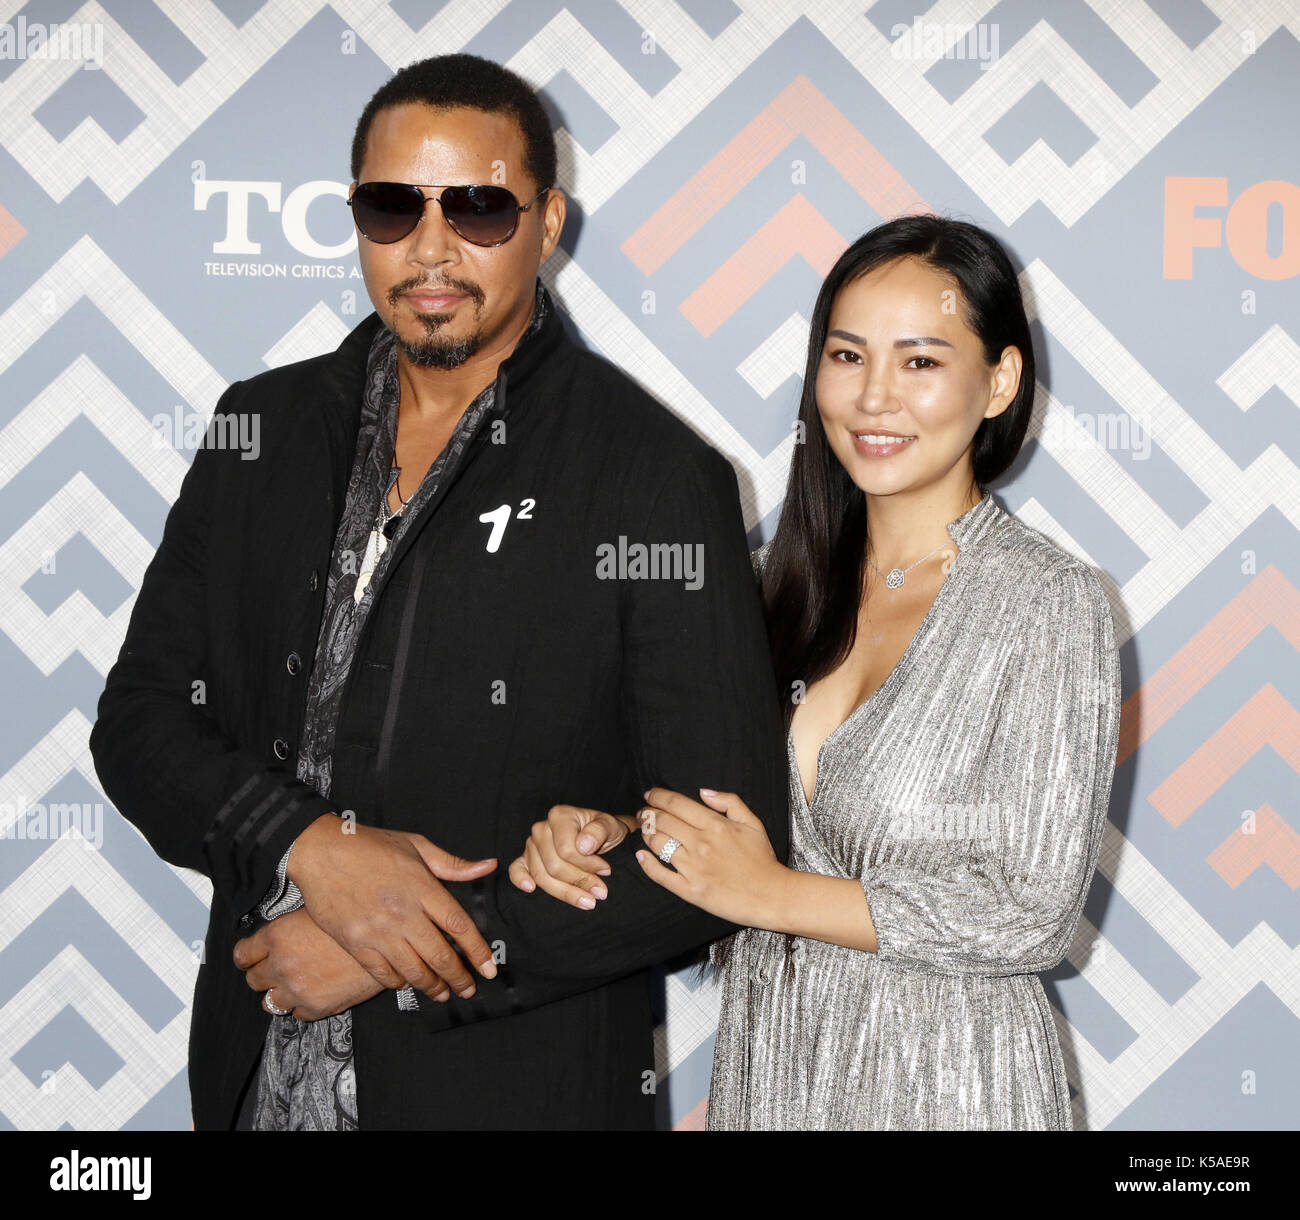 FOX TCA After Party held at Soho House West Hollywood - Arrivals  Featuring: Terrence Howard, Miranda Pak Where: West Hollywood, California, United States When: 08 Aug 2017 Credit: Nicky Nelson/WENN.com Stock Photo